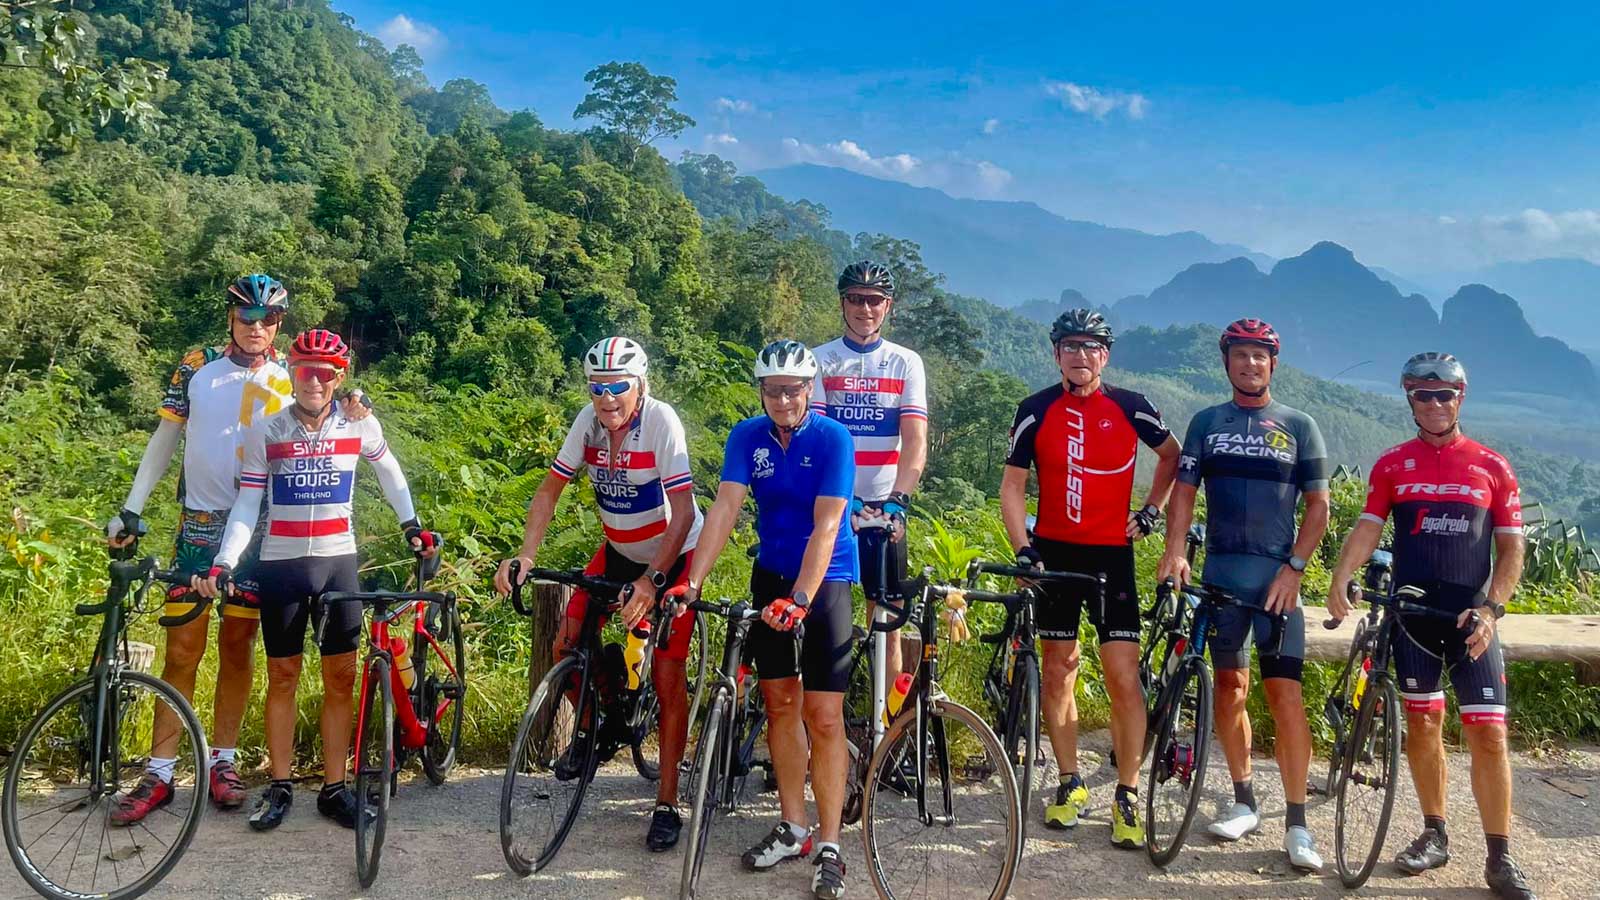 Cyclists posing in front of scenic Thai landscape